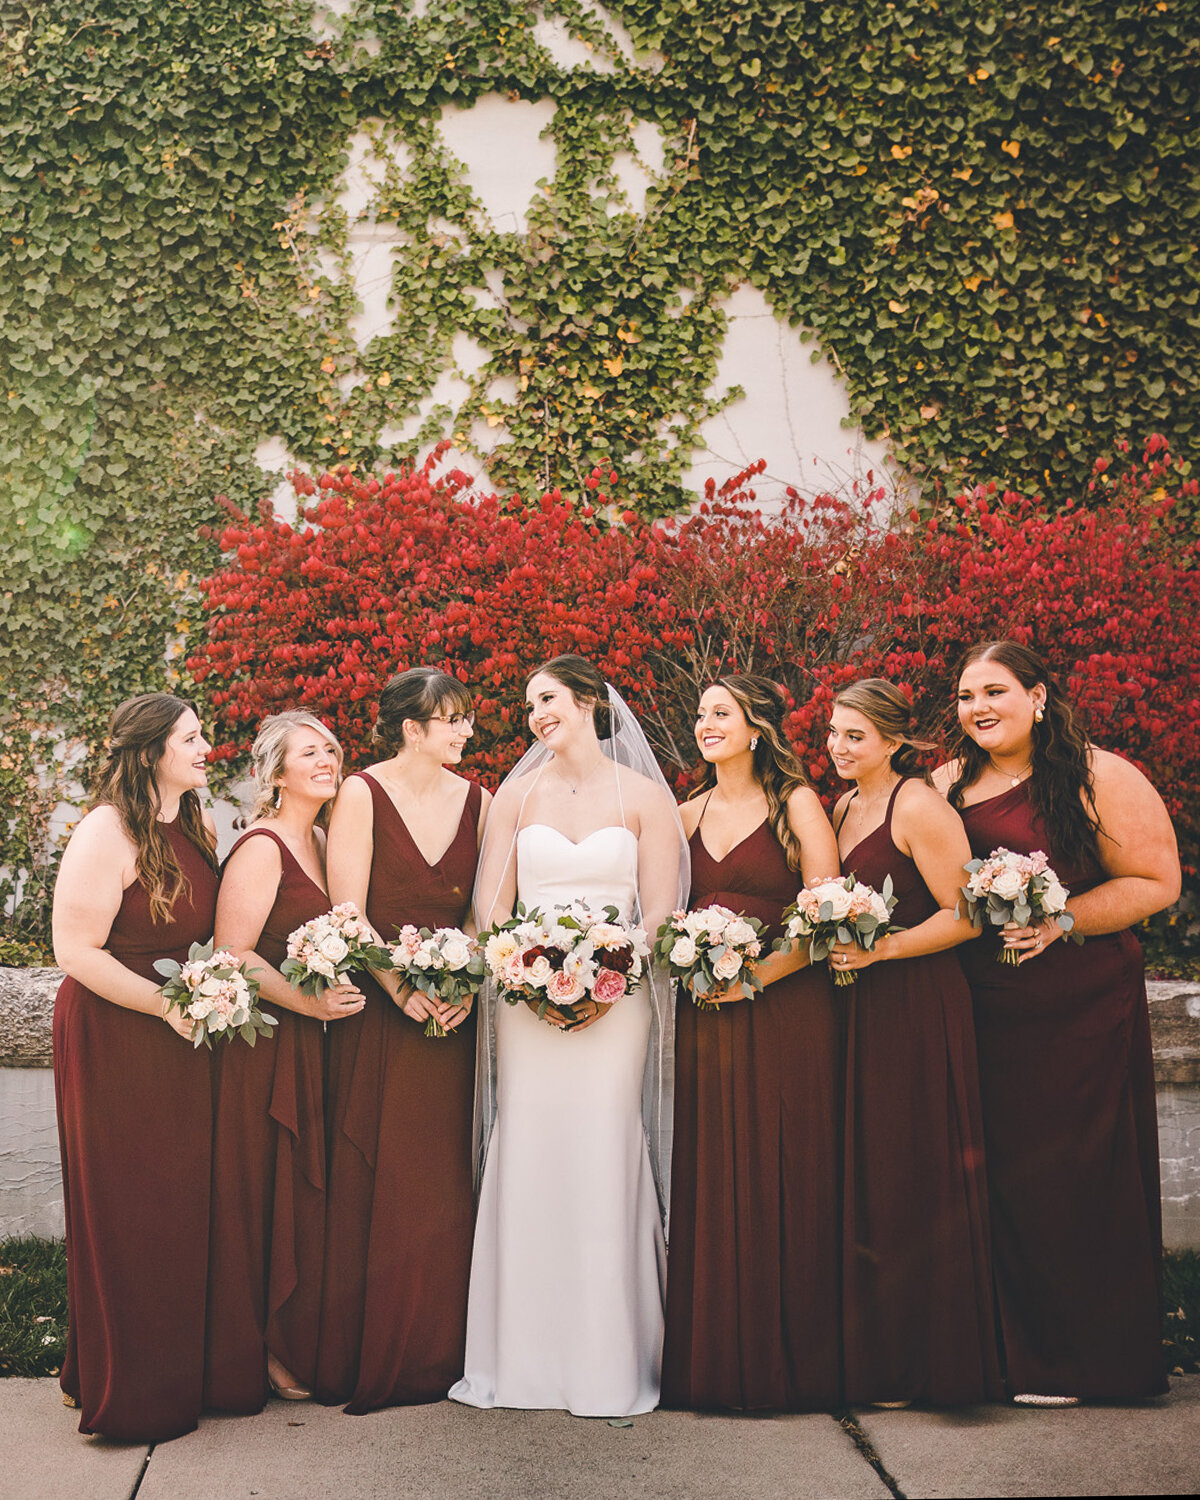 Can we go back to warm days and prime autumn colors? 🍂🧡🍁

Just asking for a friend.😉

Images: @sarahbabcockstudio 
Floral: @floralvdesign 
Venue: @steamplantdayton 

#daytonweddingplanner #daytonweddingplanning #thesteamplant #steamplantdayton #c